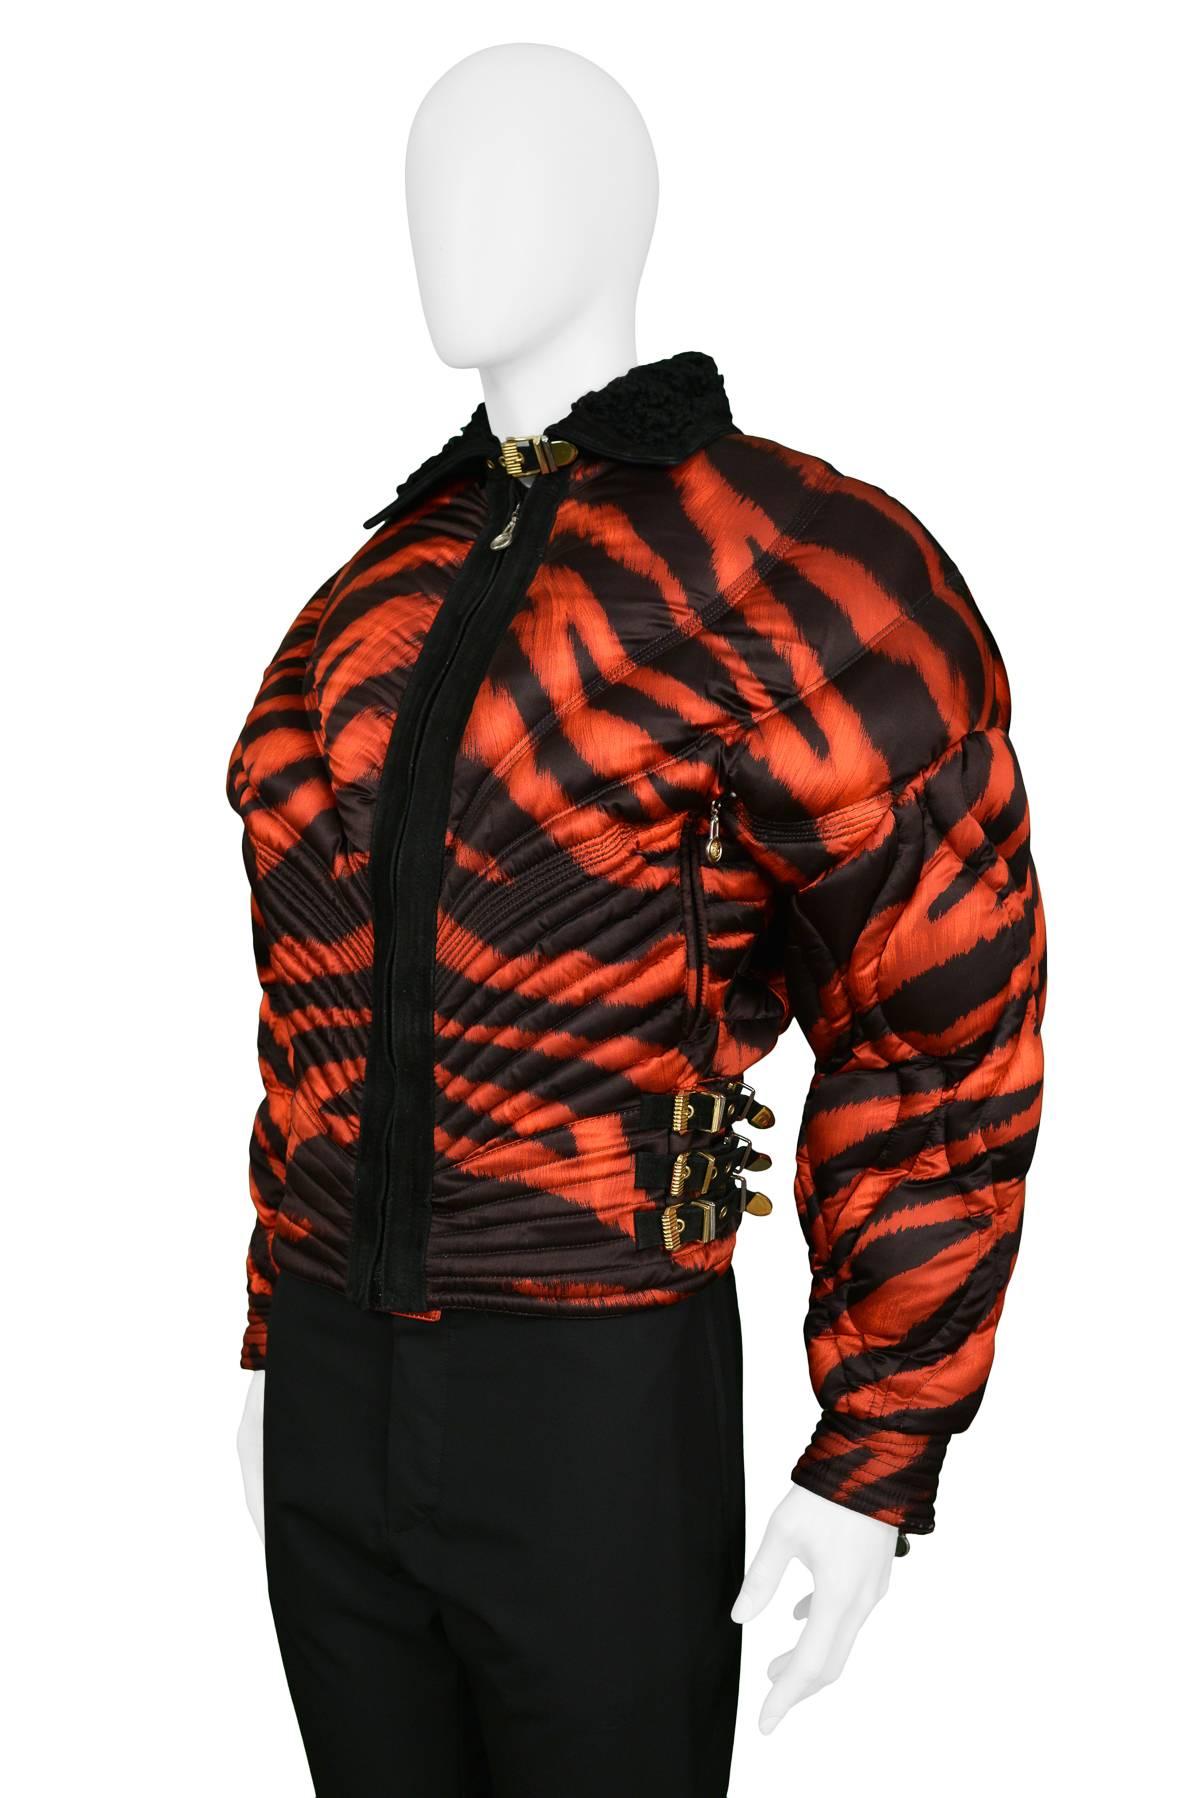 Gianni Versace rare apres quilted ski jacket with red and black tiger print. Corset style waist has leather and gold bondage buckles. The zipper pulls through out are adorned with the Medusa icons. Jacket is trimmed in black suede with Mongolian fur